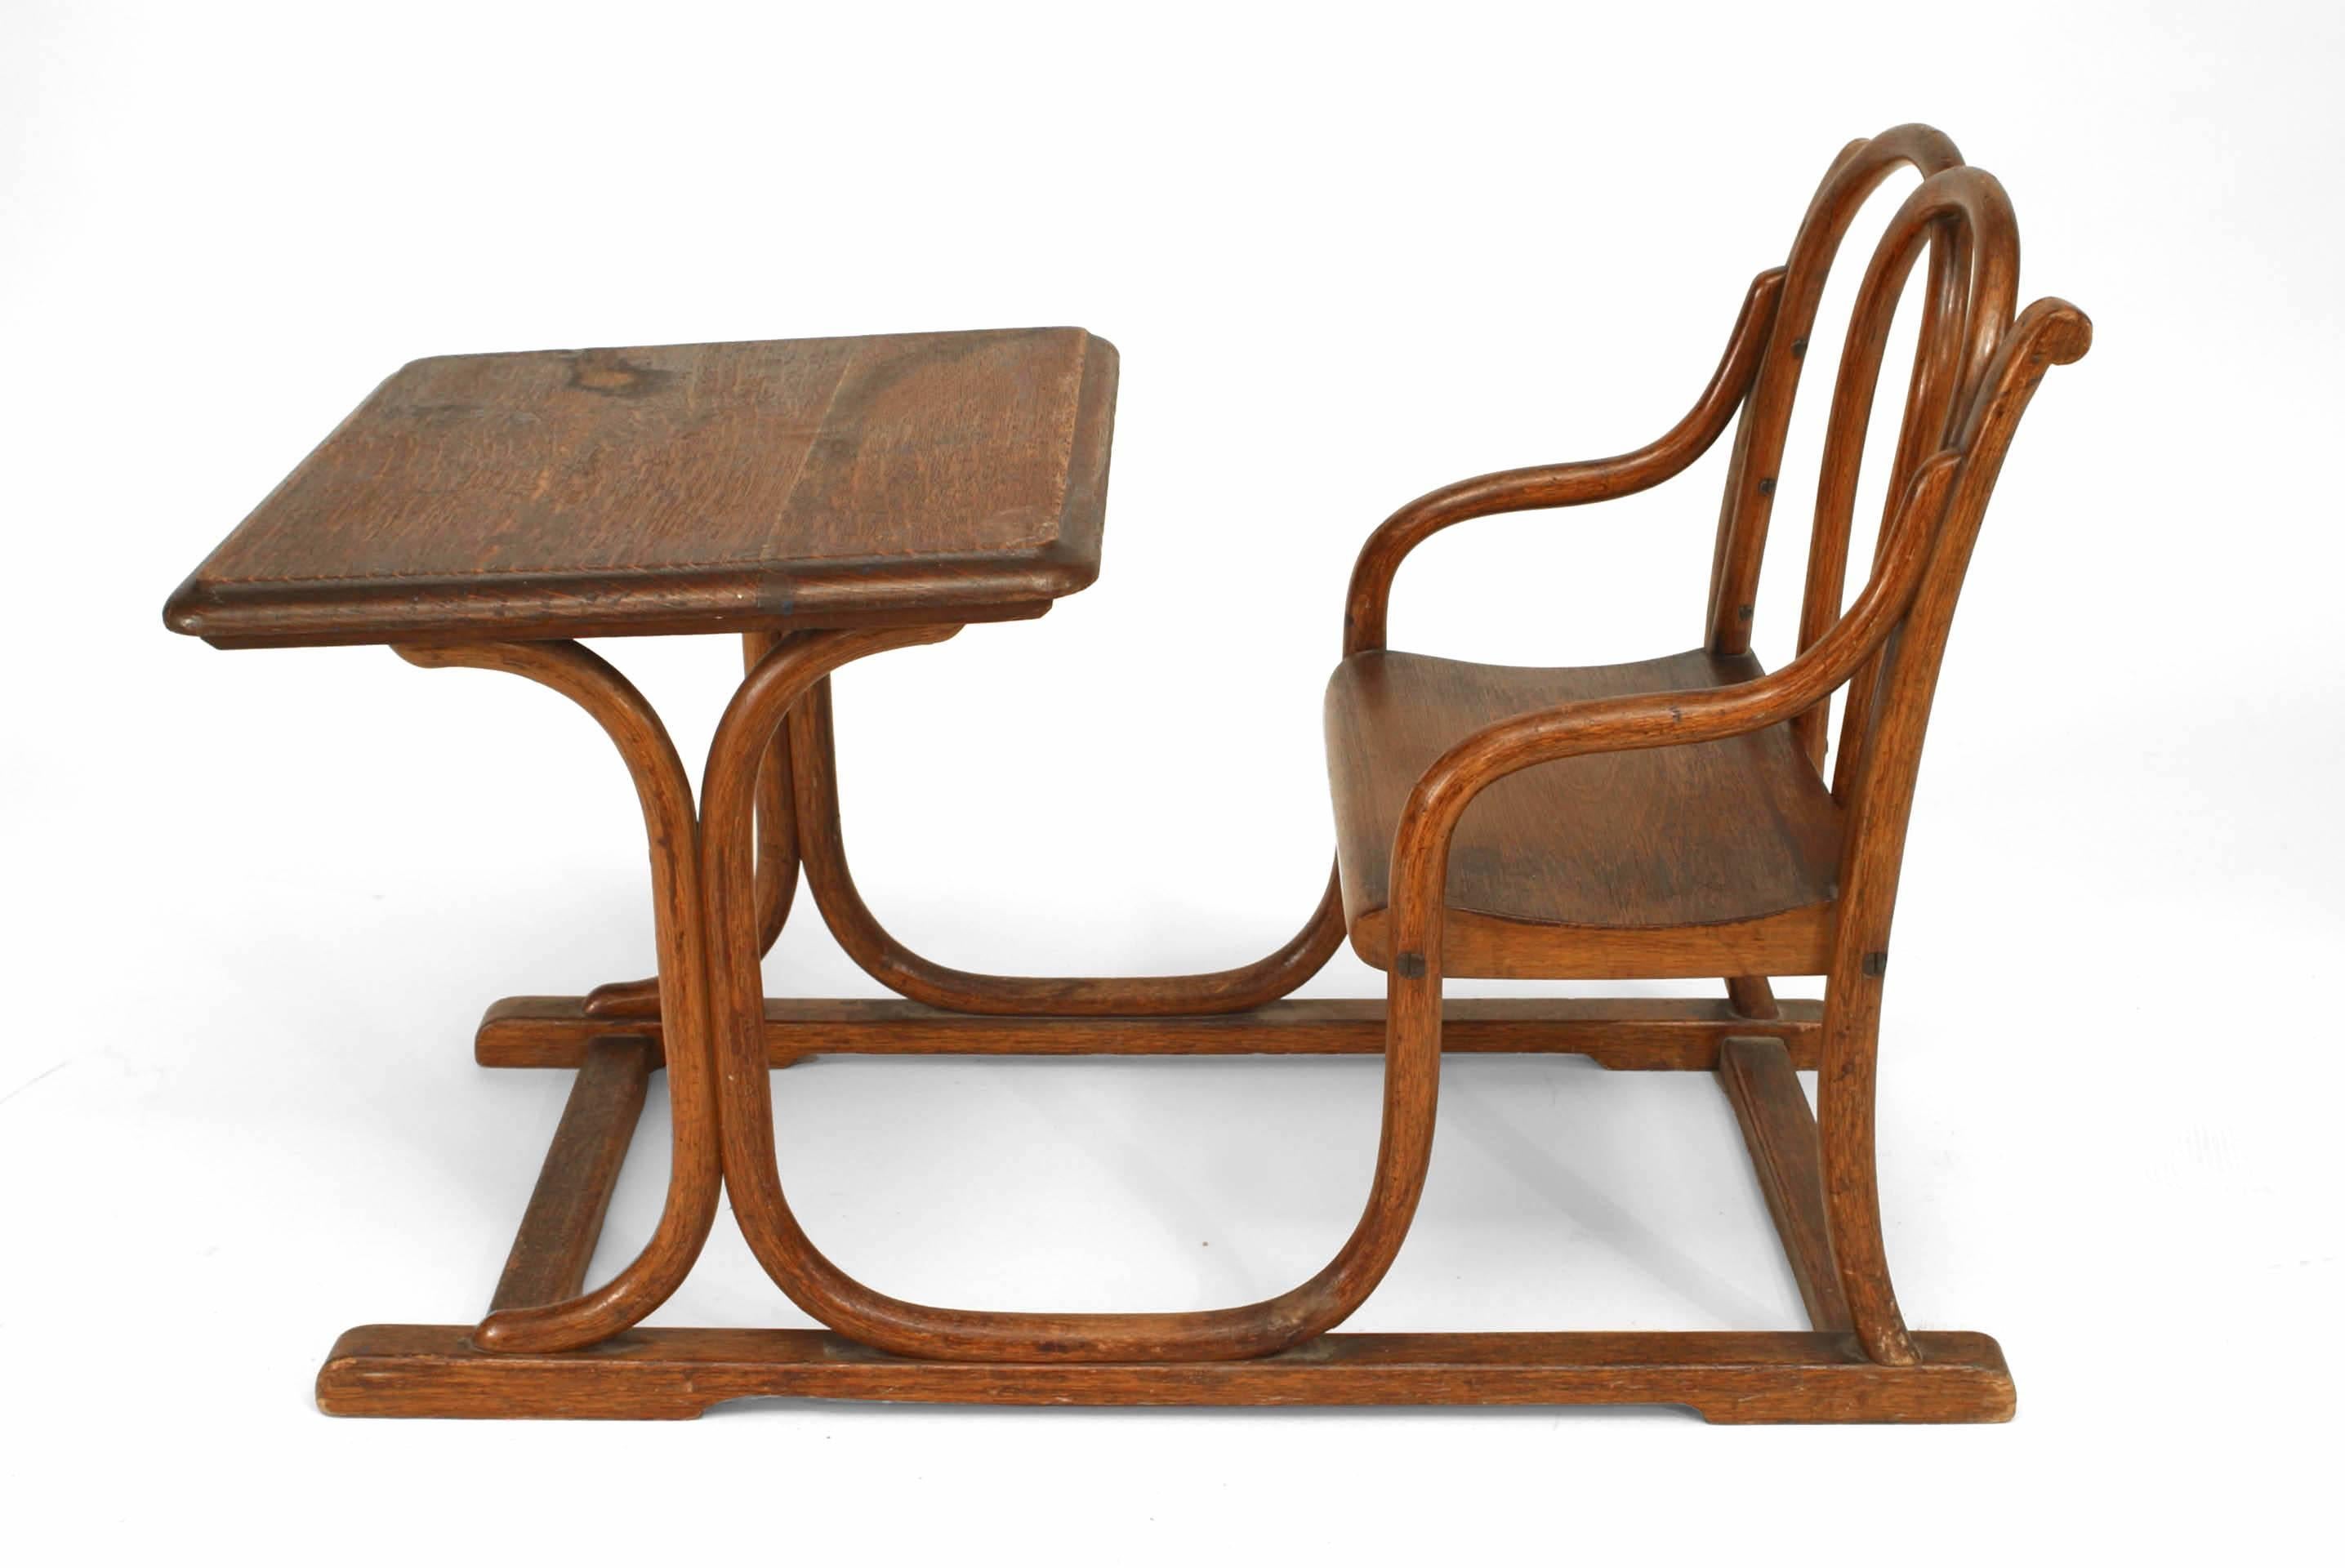 Austrian Bentwood small child's desk with attached chair with double hoop back design. (THONET label and brand)
